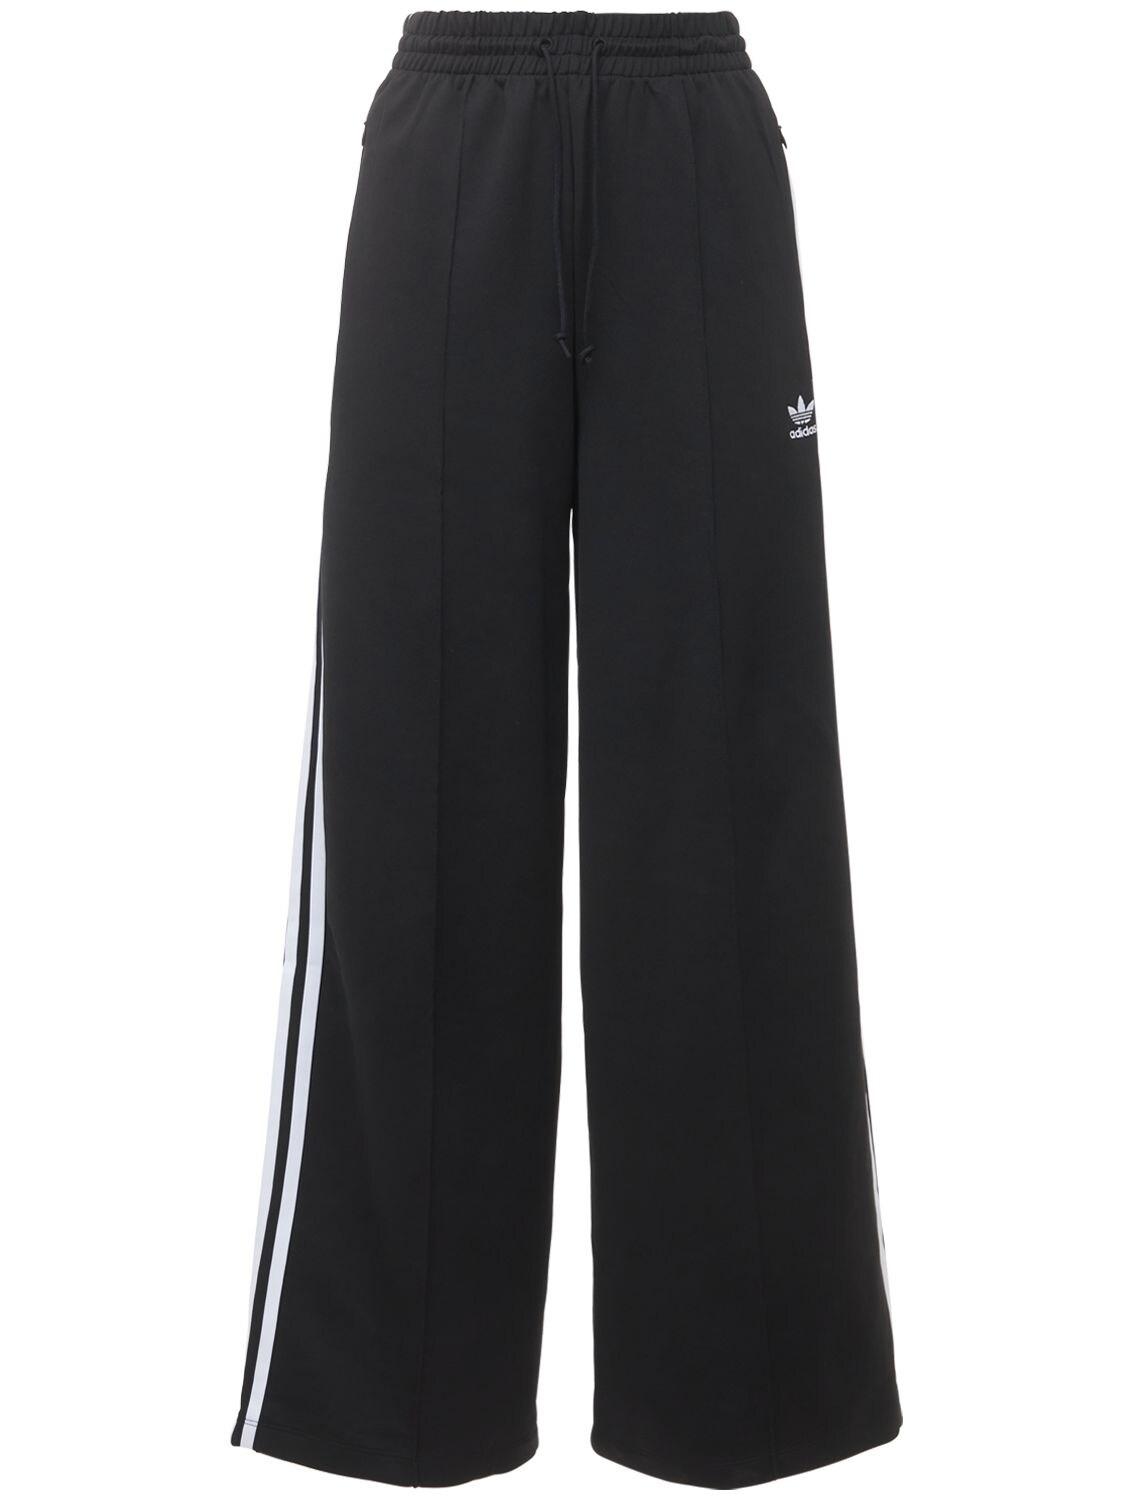 adidas Originals Relaxed Pants in Black | Lyst